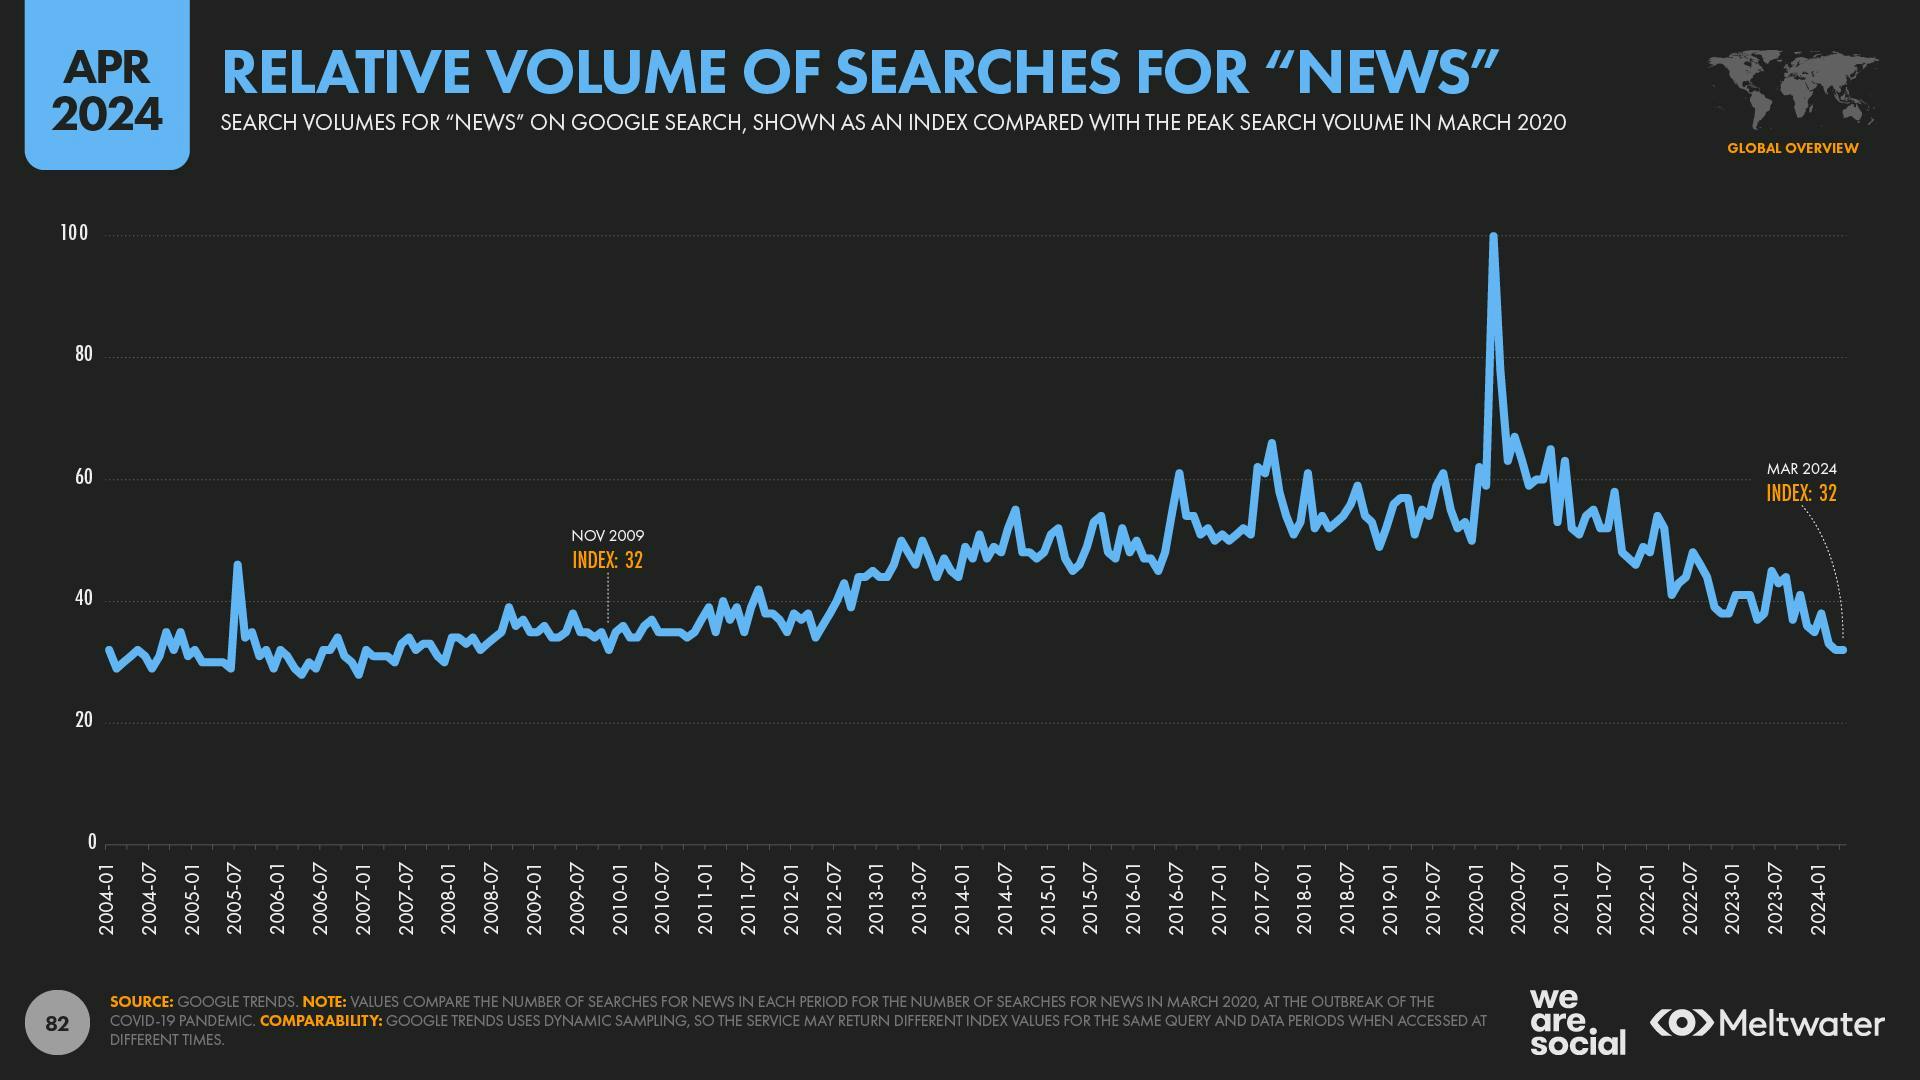 Relative volume of searches for news